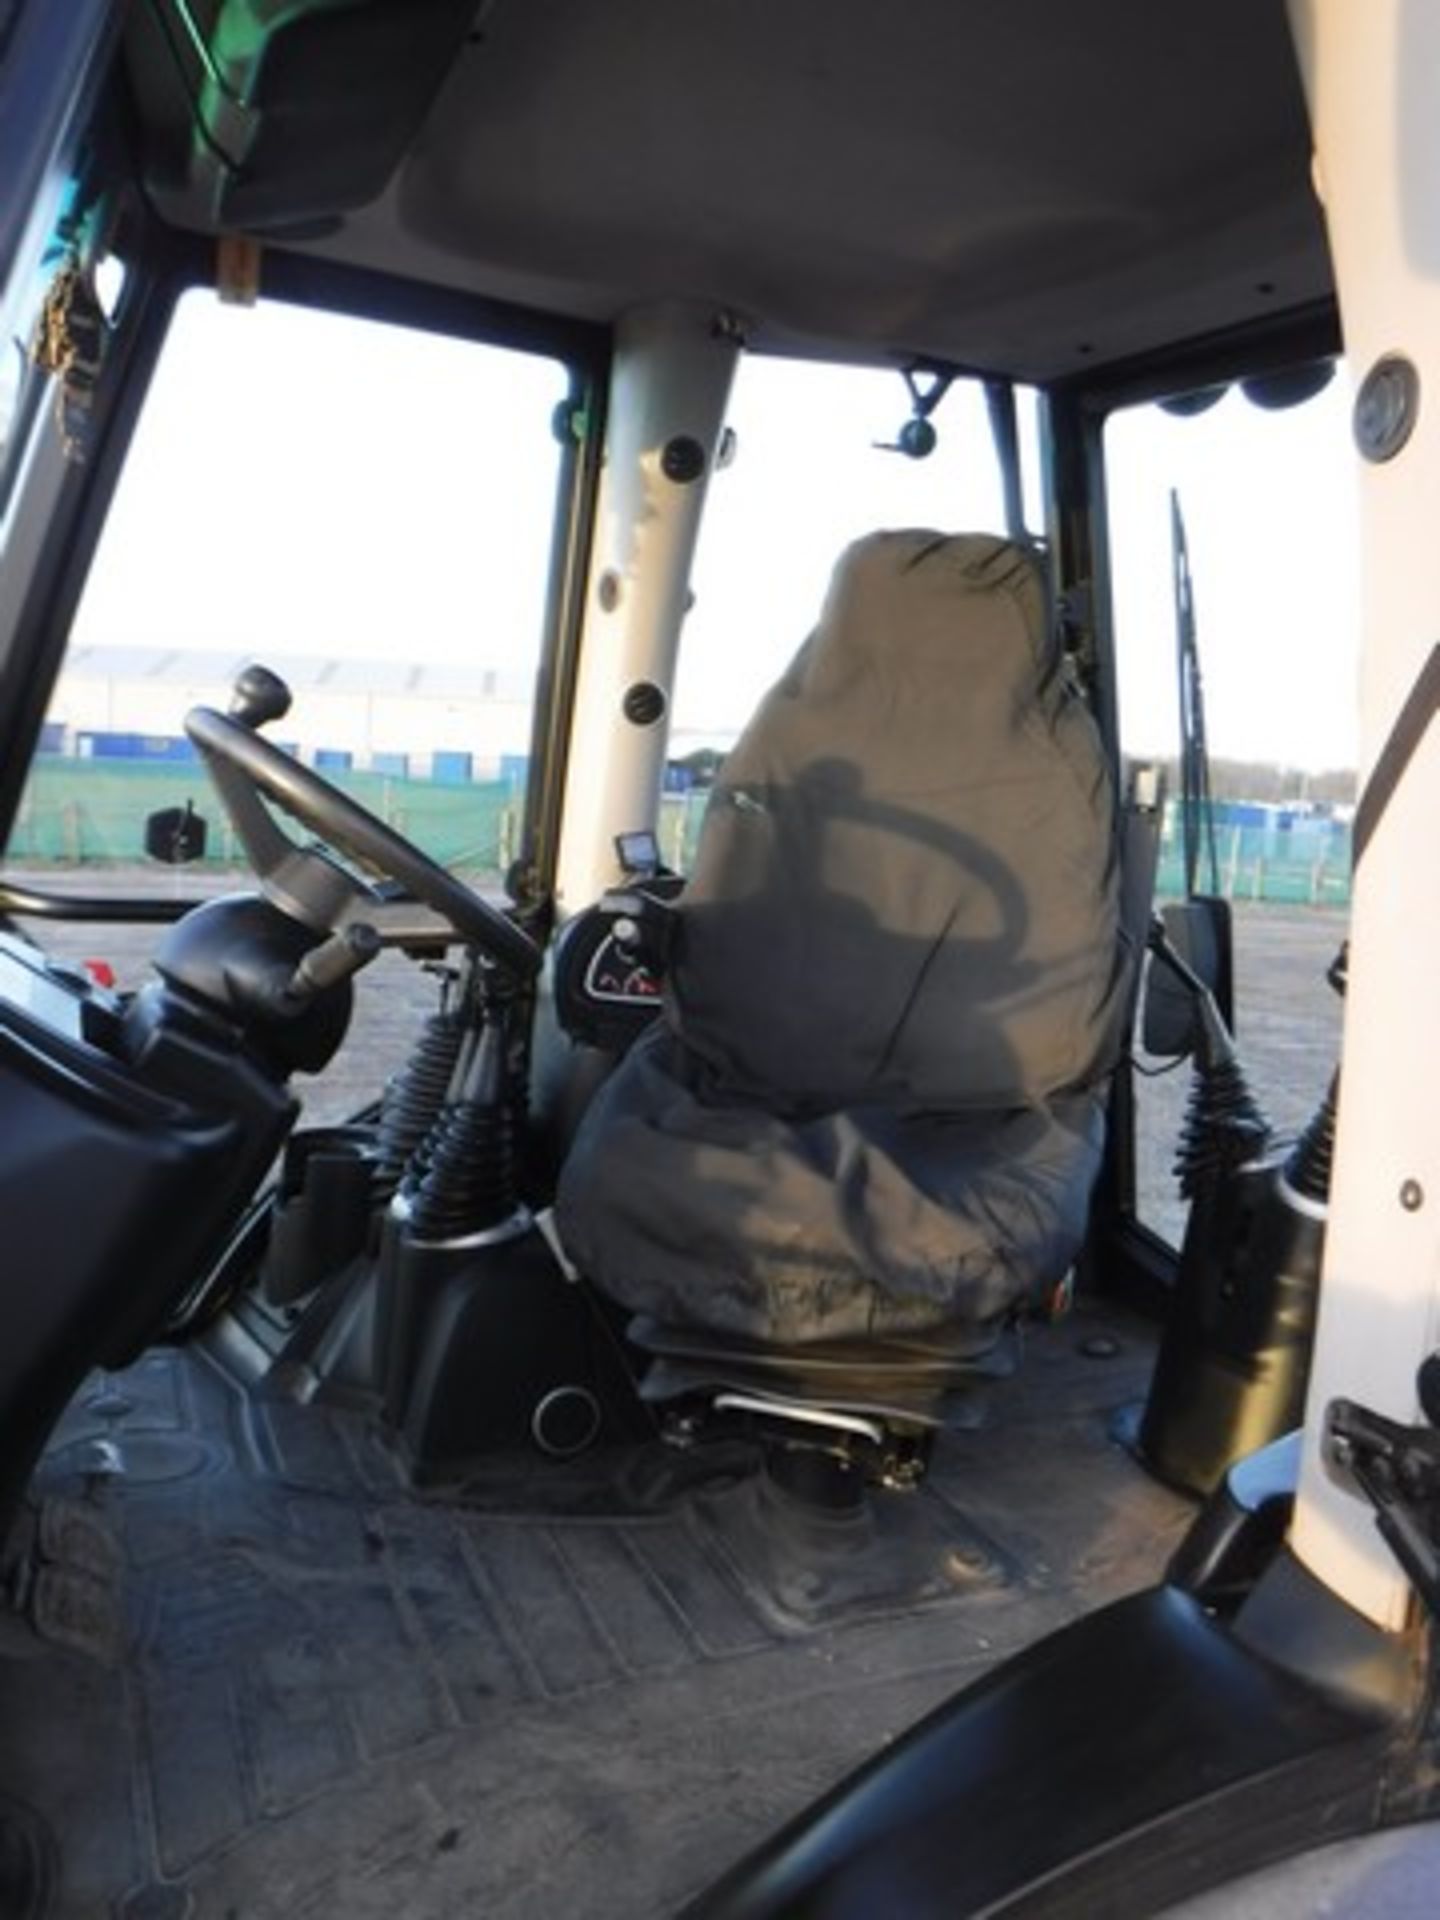 2011 JCB 3CX ECO 4 in 1 bucket S/N JCB3CX4TP02008318 - 6175 hrs (not verified) - Image 10 of 14